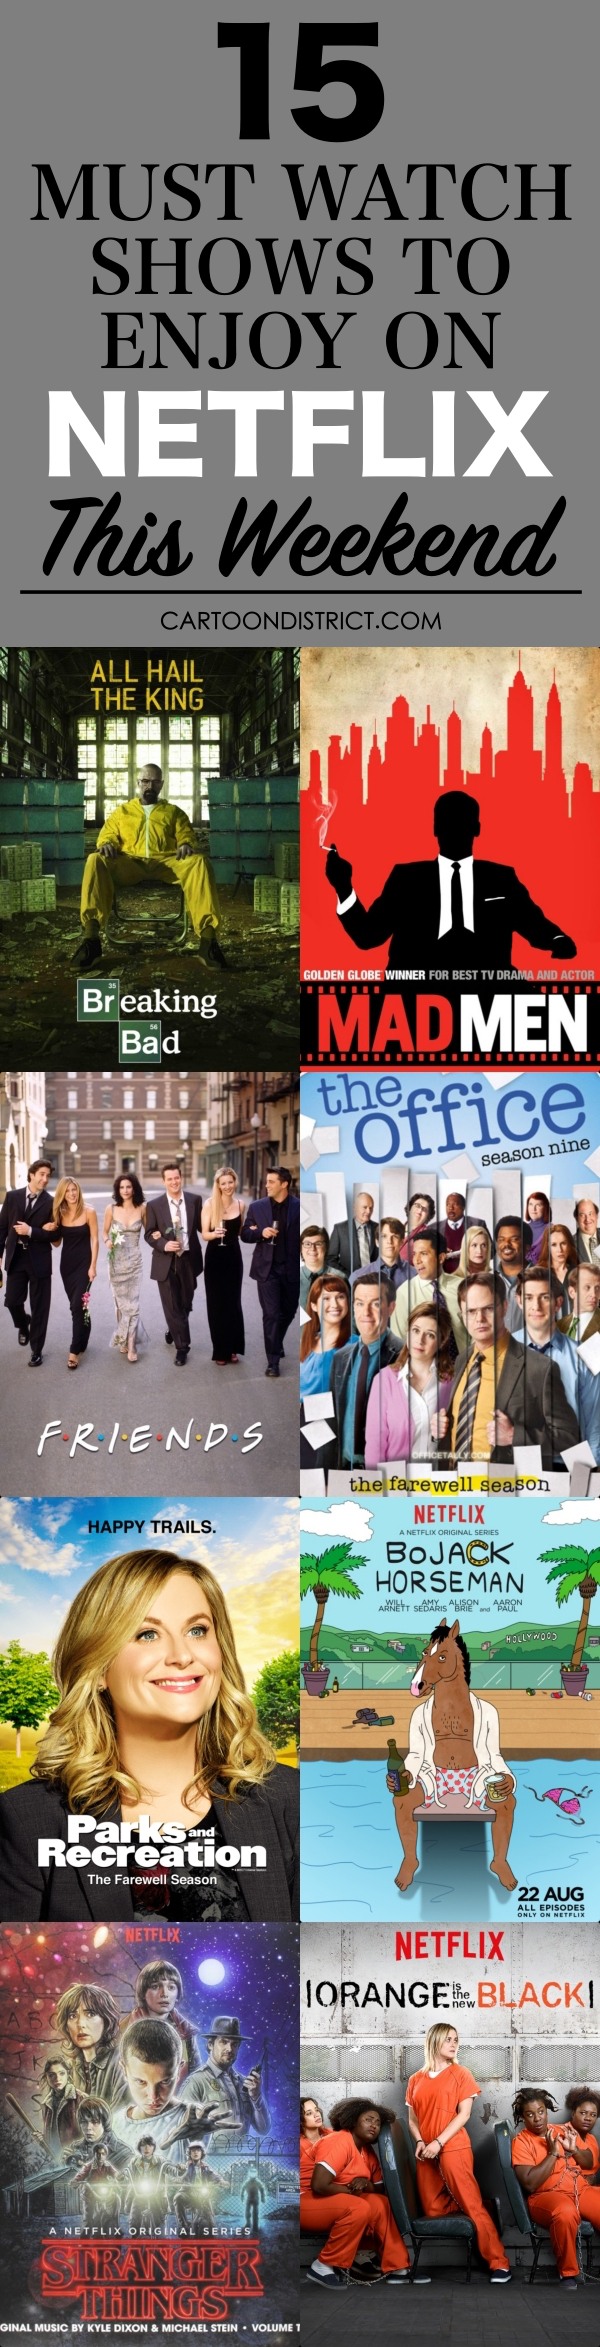 Must Watch Shows To Enjoy On Netflix This Weekend